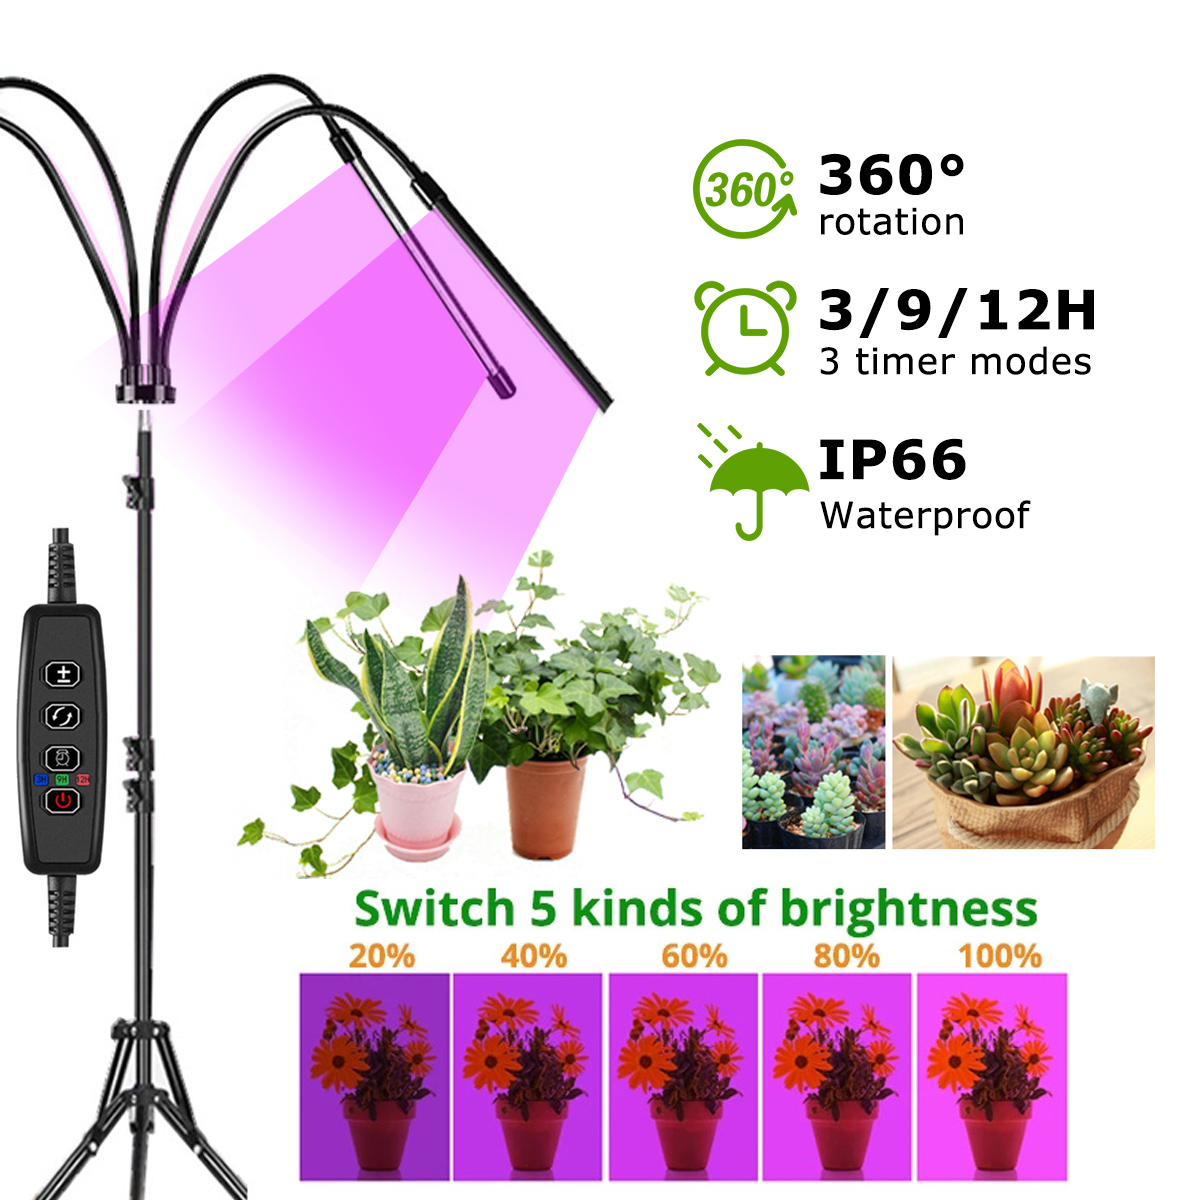 LED-Grow-Light-Tripod-Plant-Growing-Lamp-Lights-With-Tripod-For-Indoor-Plants-1836993-1